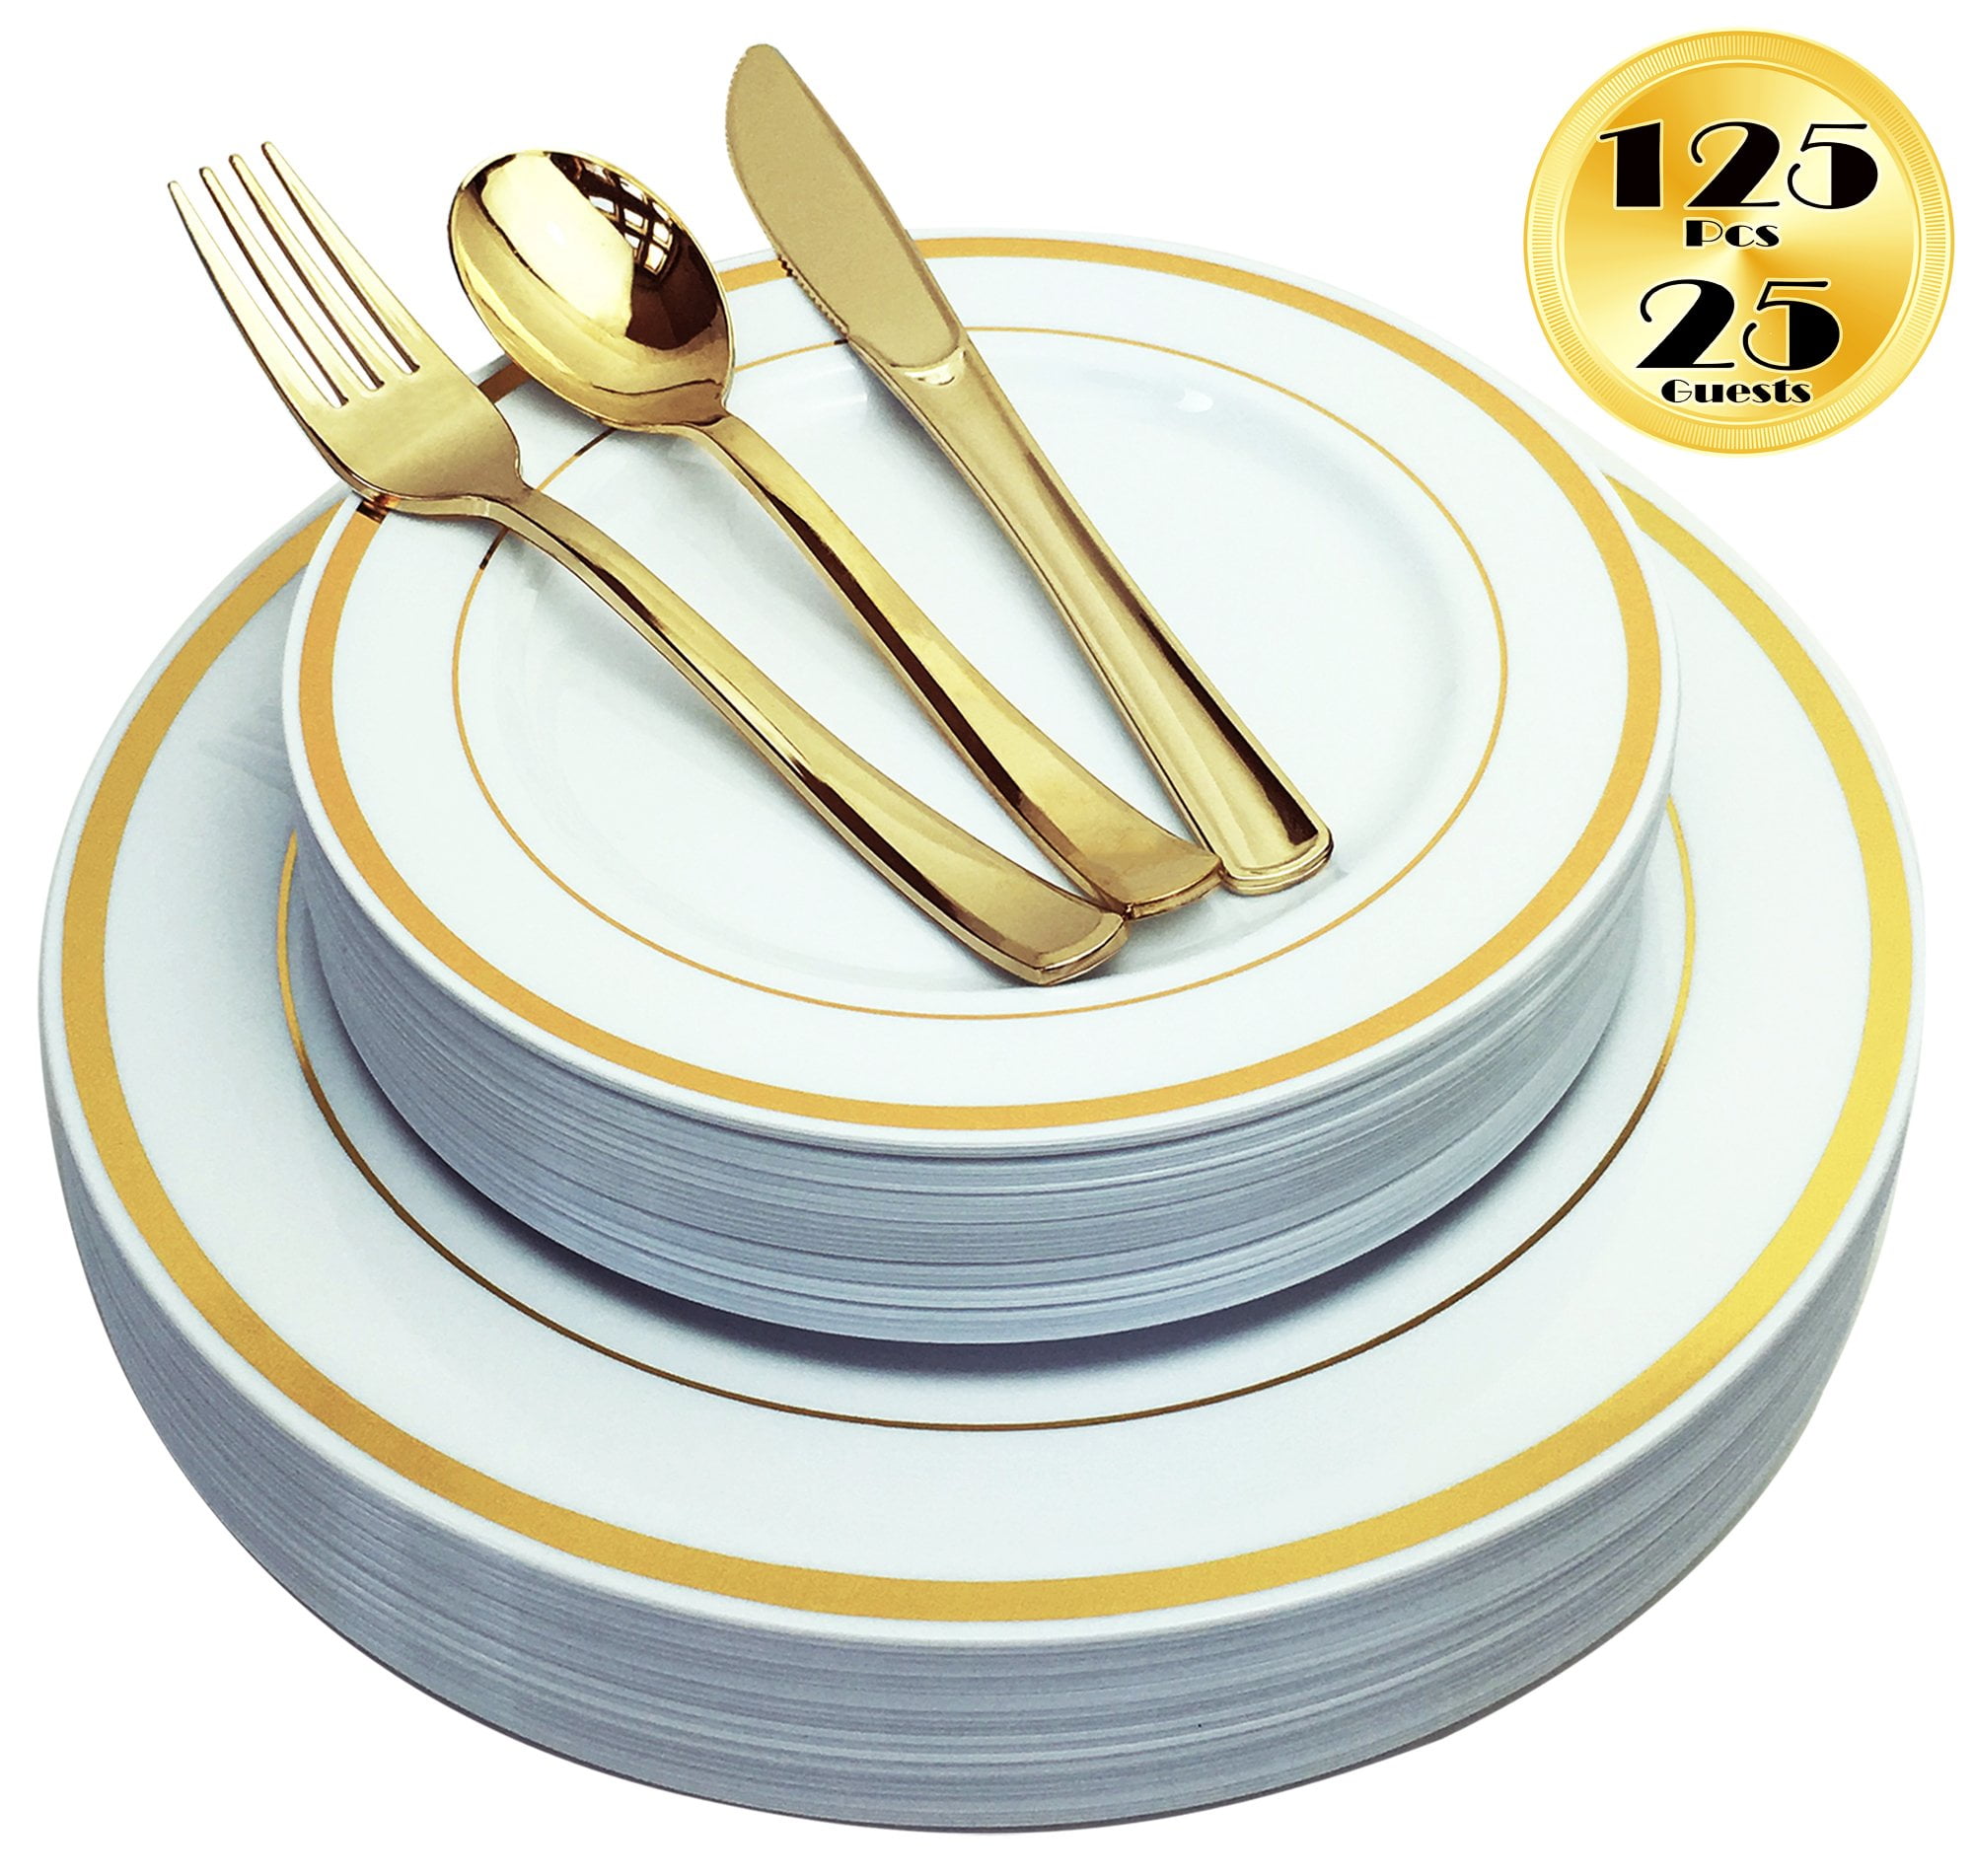 25 Salad Plates Heavy Duty Reusable Disposable Plastic Plates with Gold Rim for Party and Wedding 25 Dinner Plates JL Prime 50 Piece Gold Plastic Plates for 25 Guests